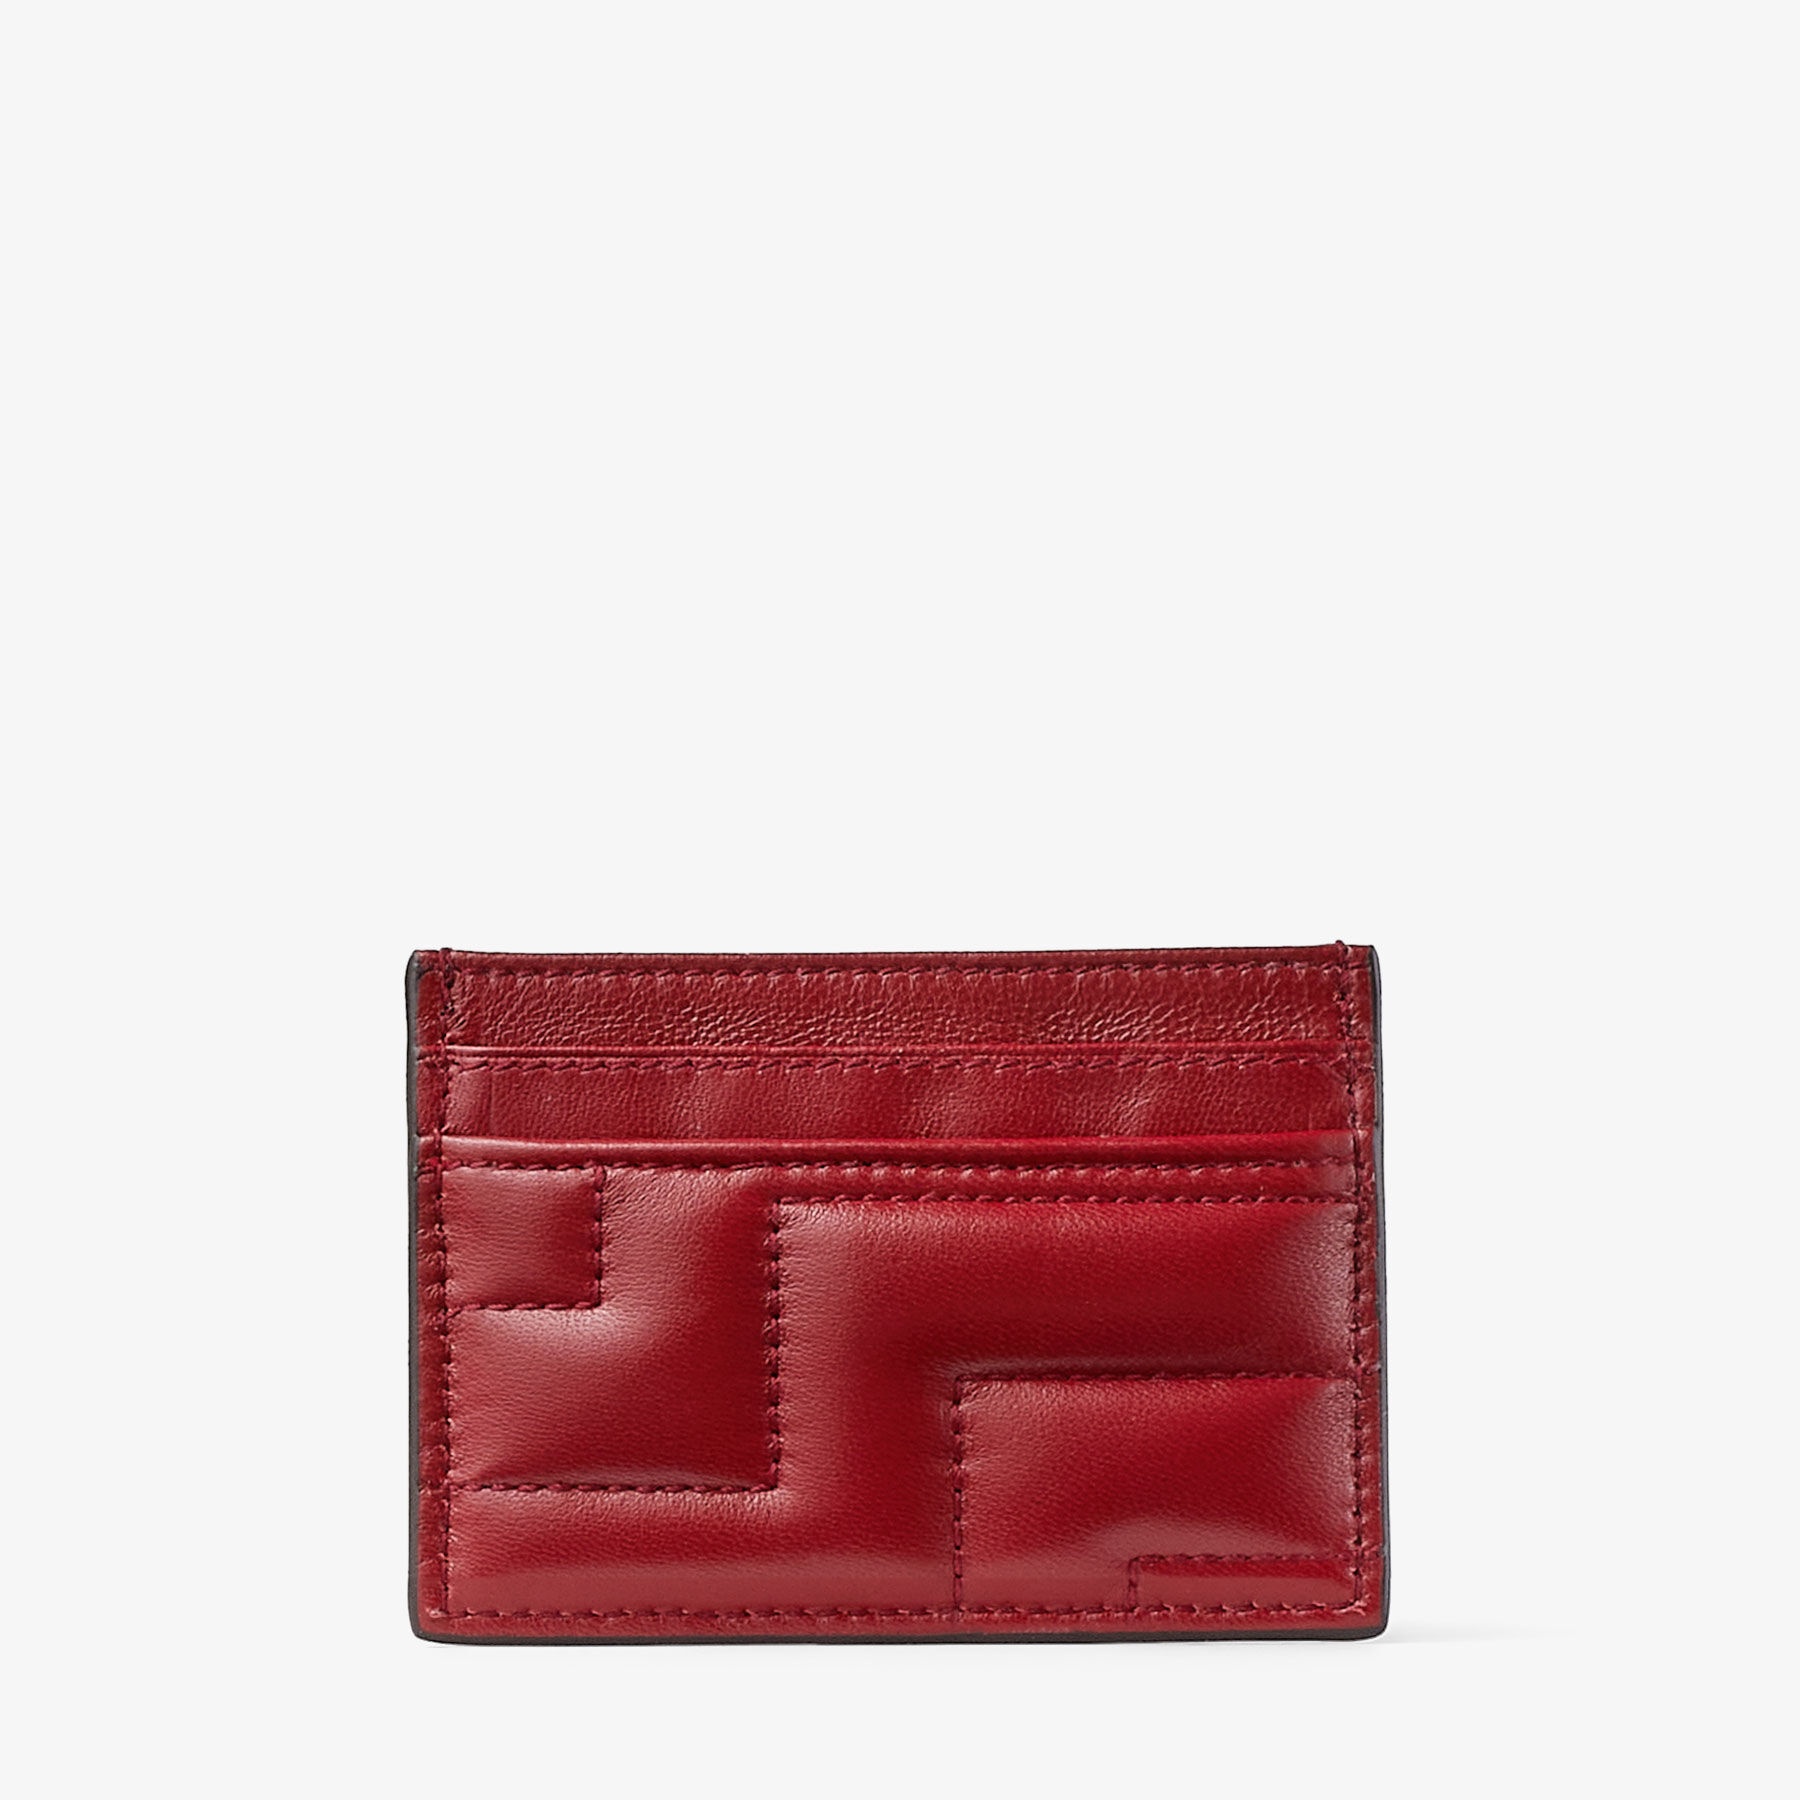 Umika
Cranberry Quilted Nappa Leather Card Holder with JC Emblem - 5